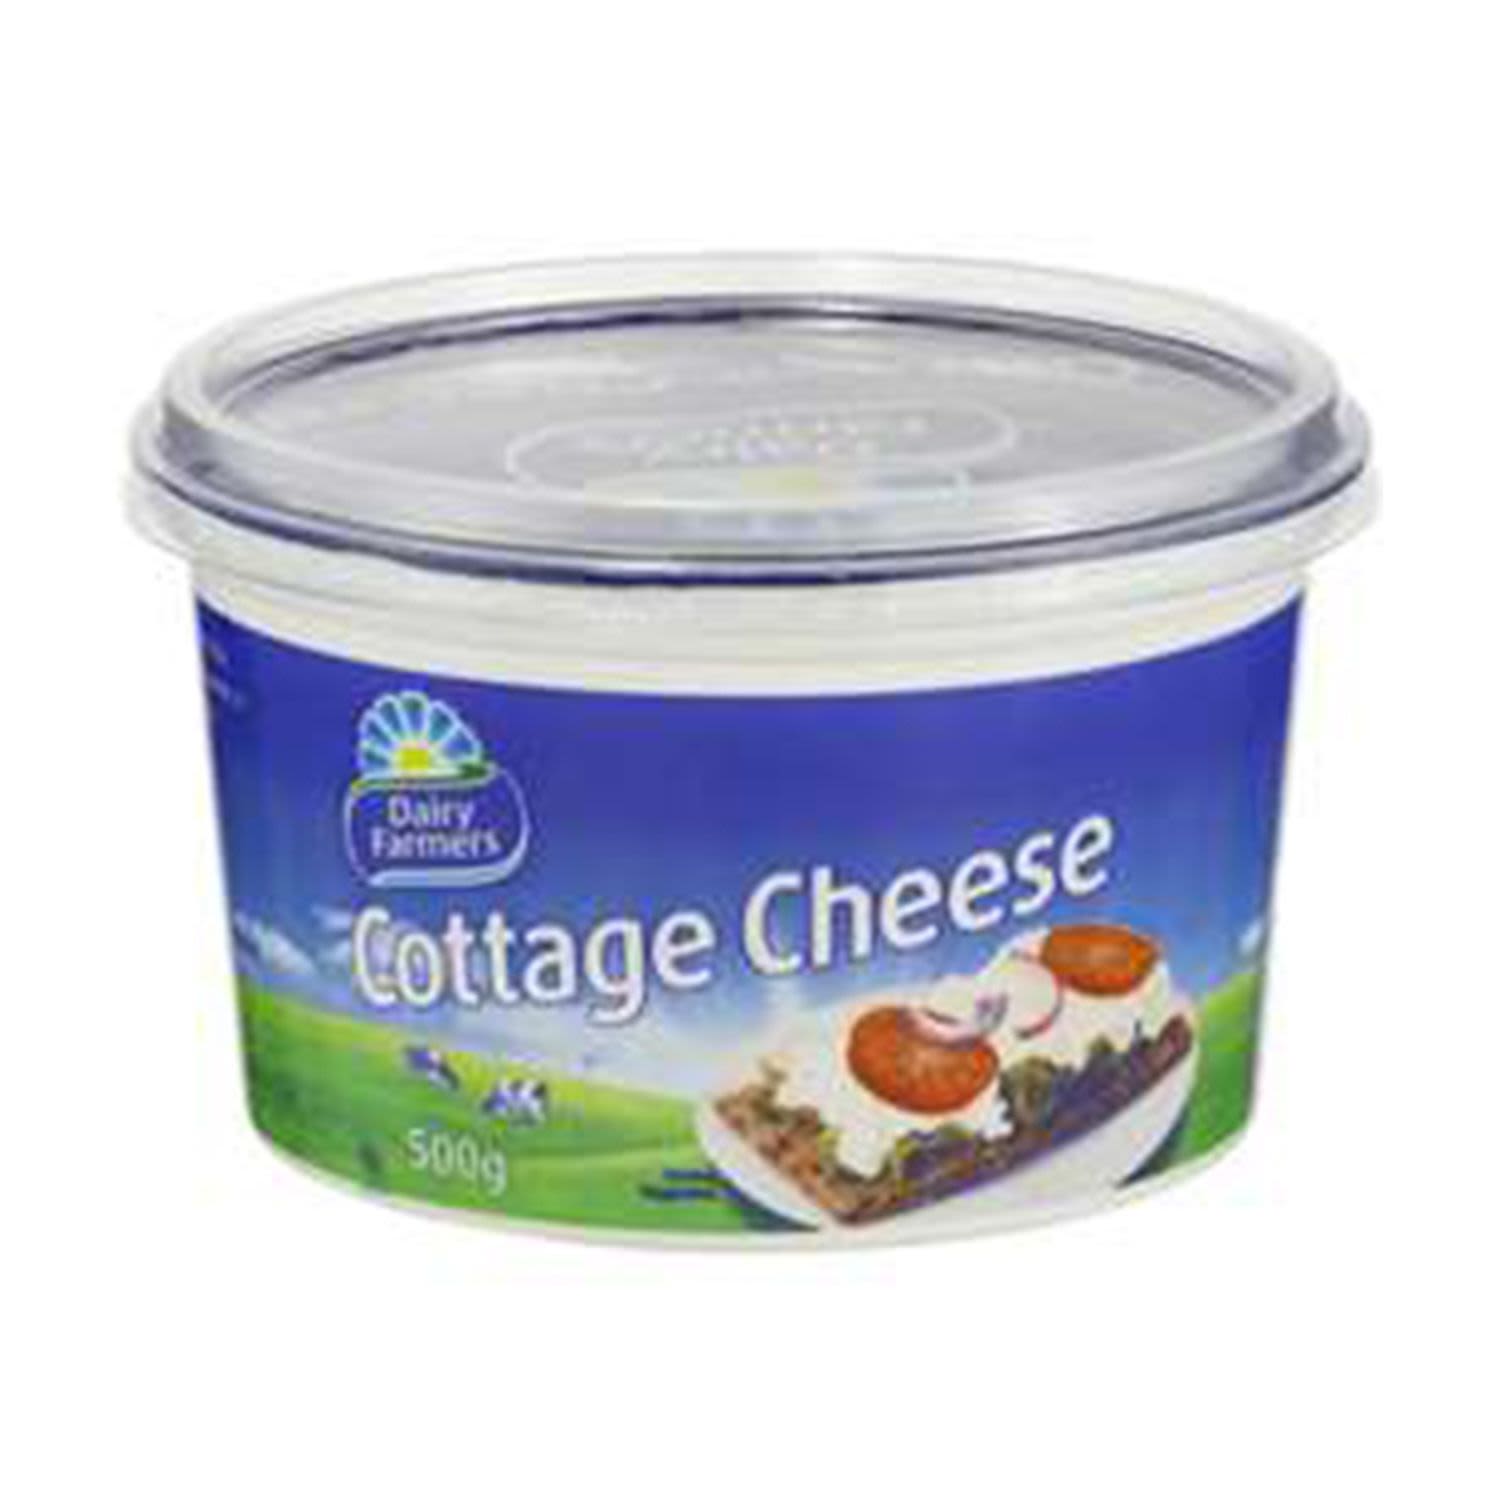 Dairy Farmers Natural Cottage Cheese, 500 Gram